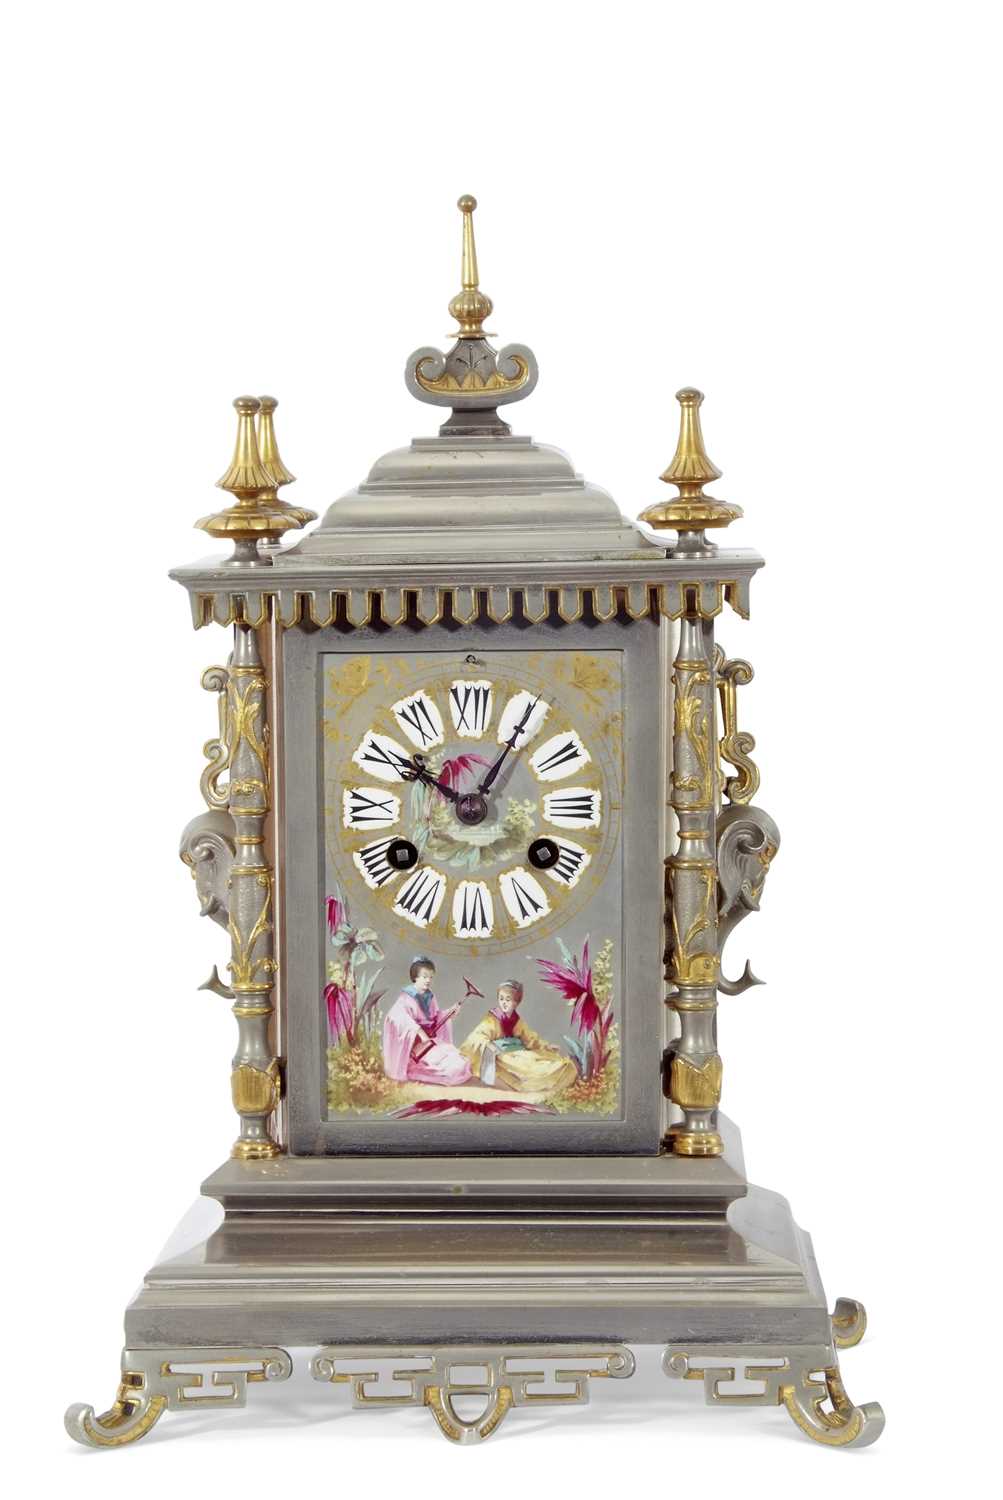 Good quality late 19th/early 20th century mantel clock, set in architectural metal and gilt